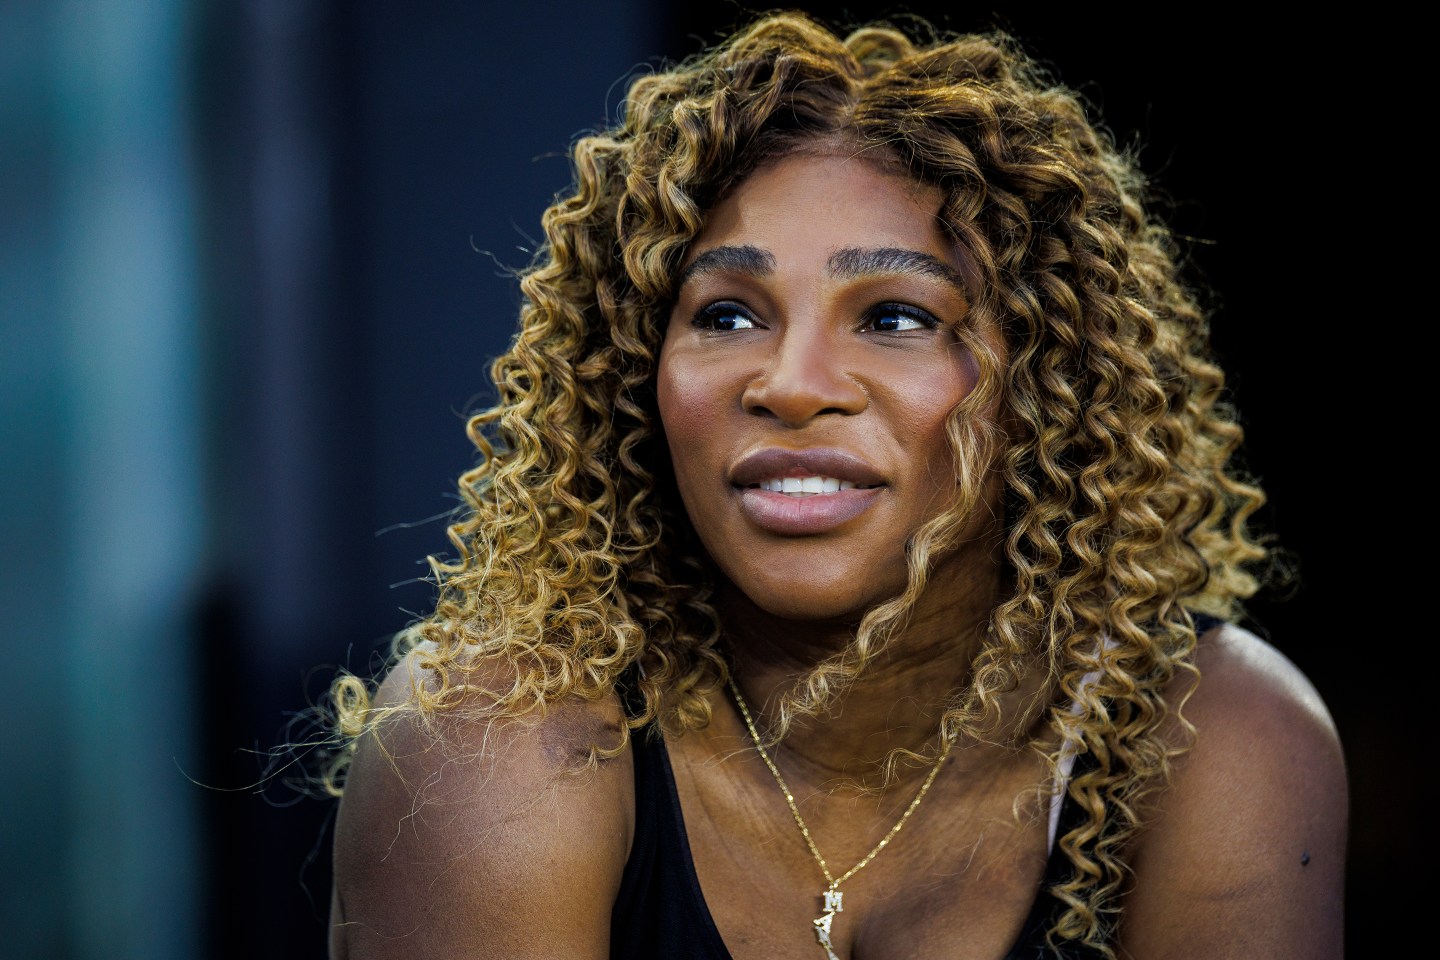 Portrait of Serena Williams wearing a necklace that says "Mama" while watching a match.